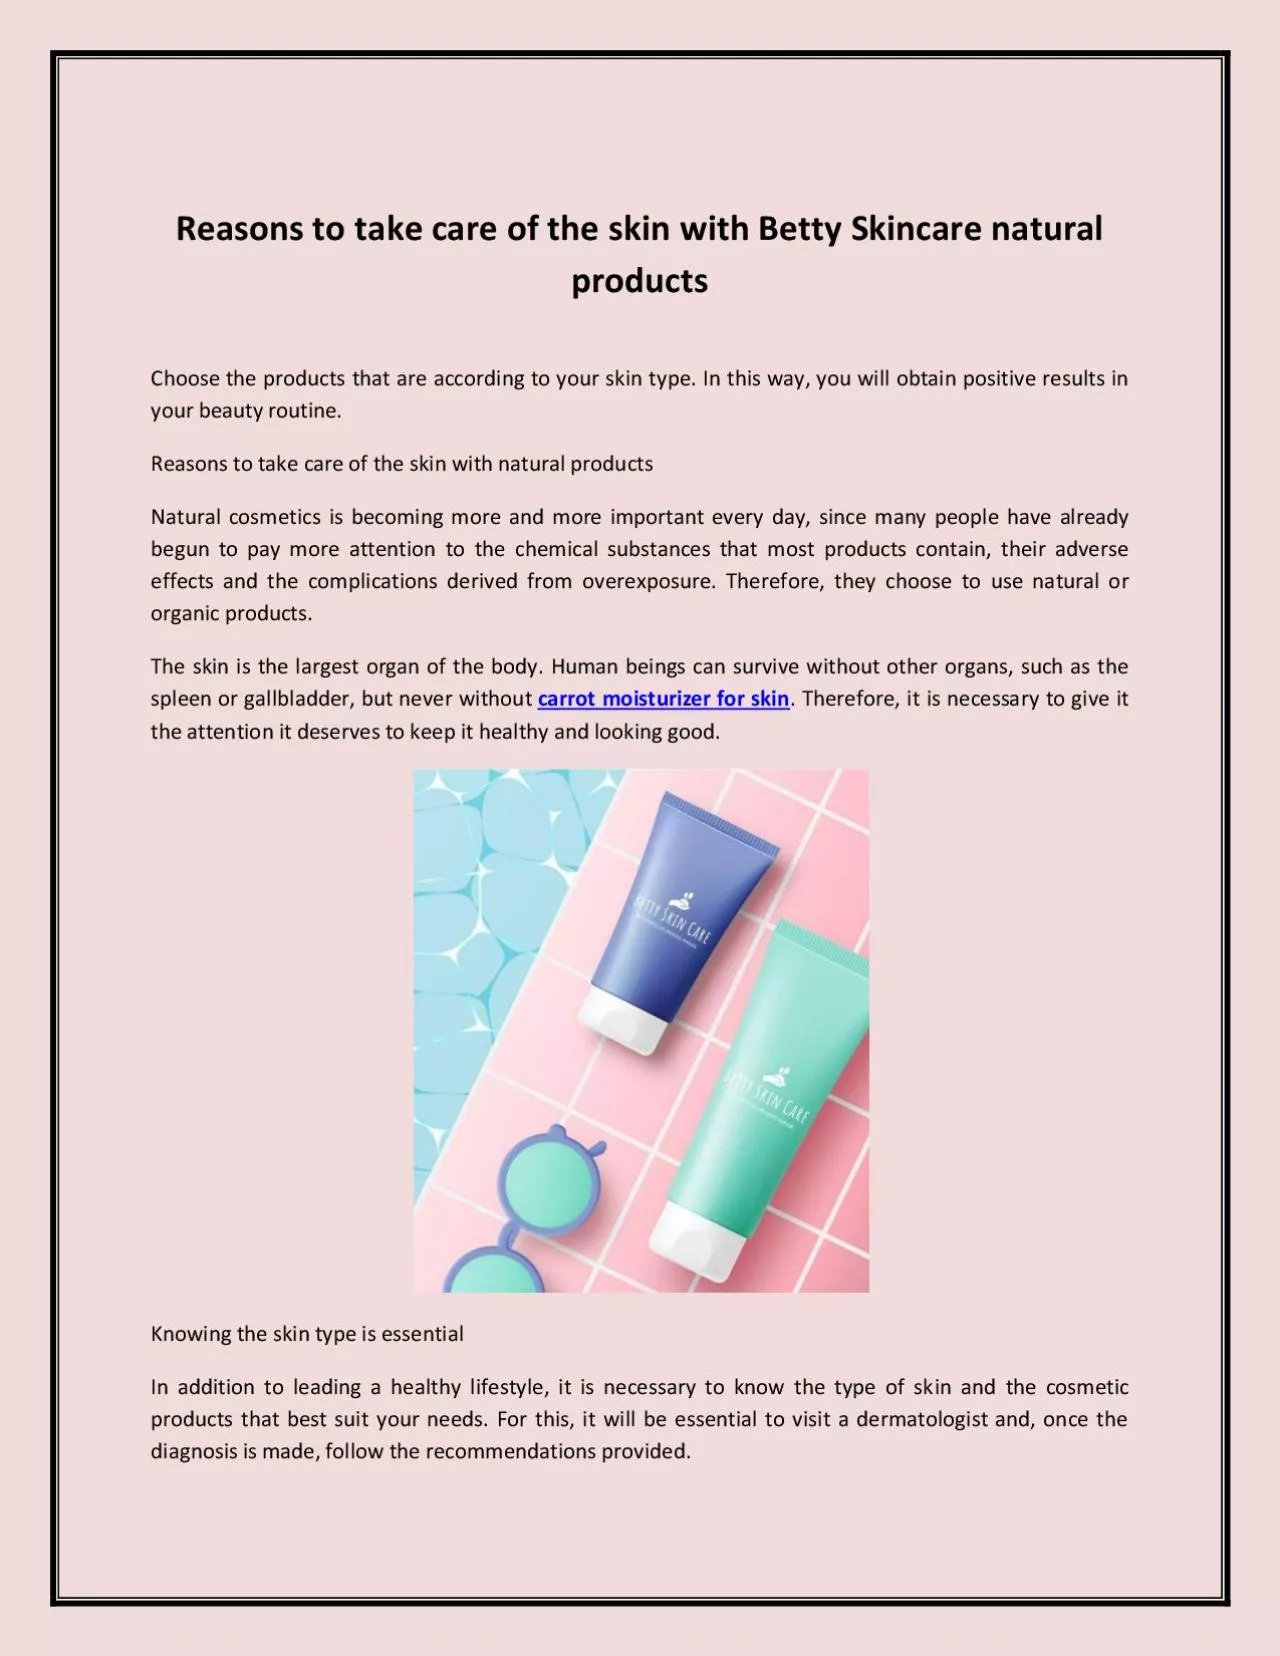 Reasons to take care of the skin with Betty Skincare natural products